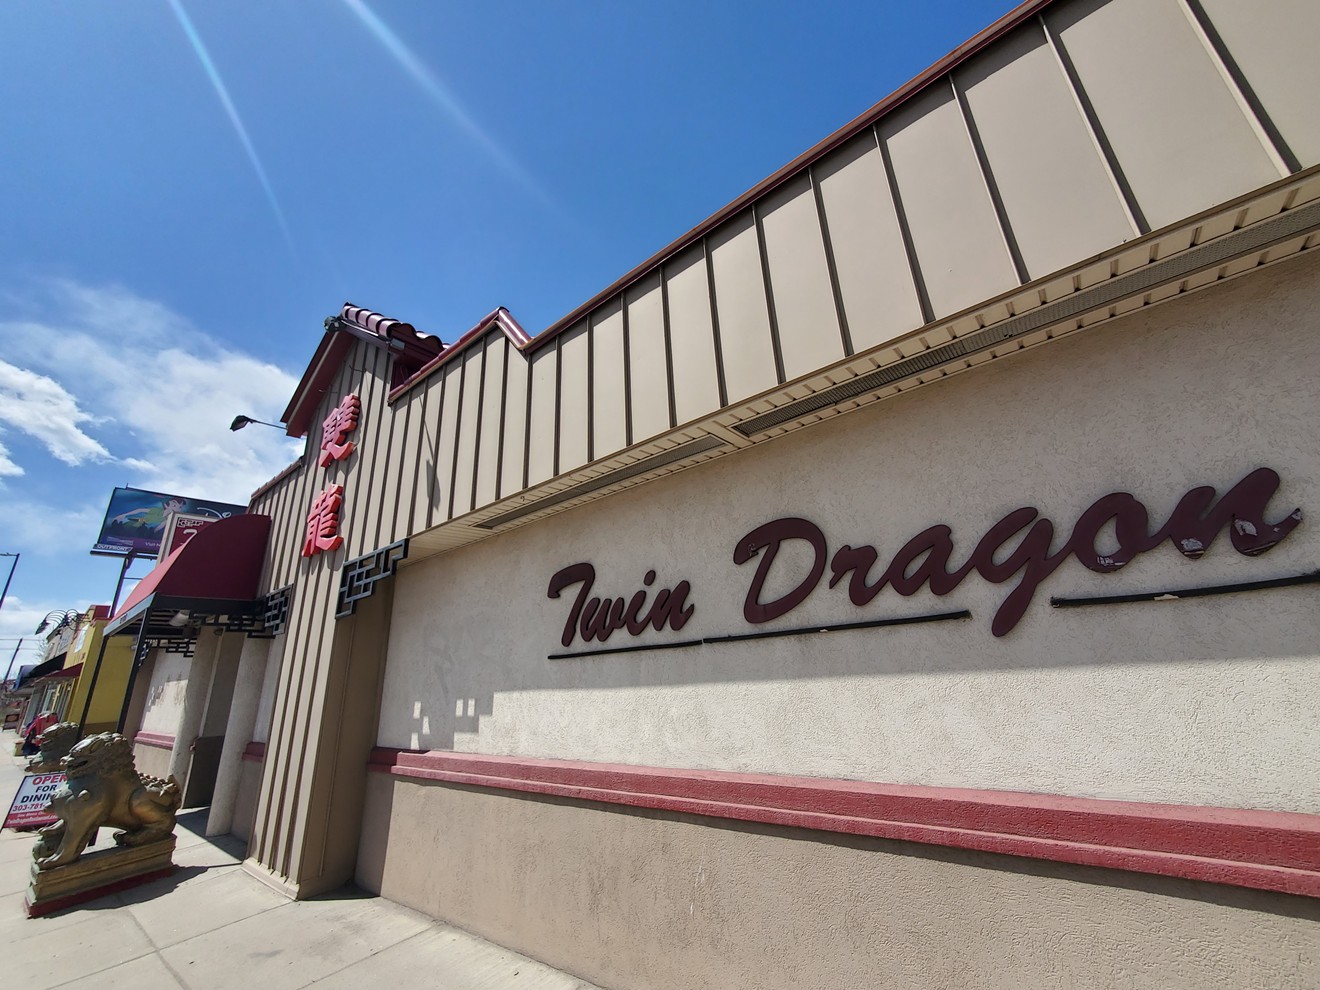 Twin Dragon opened in its current location in 1981.